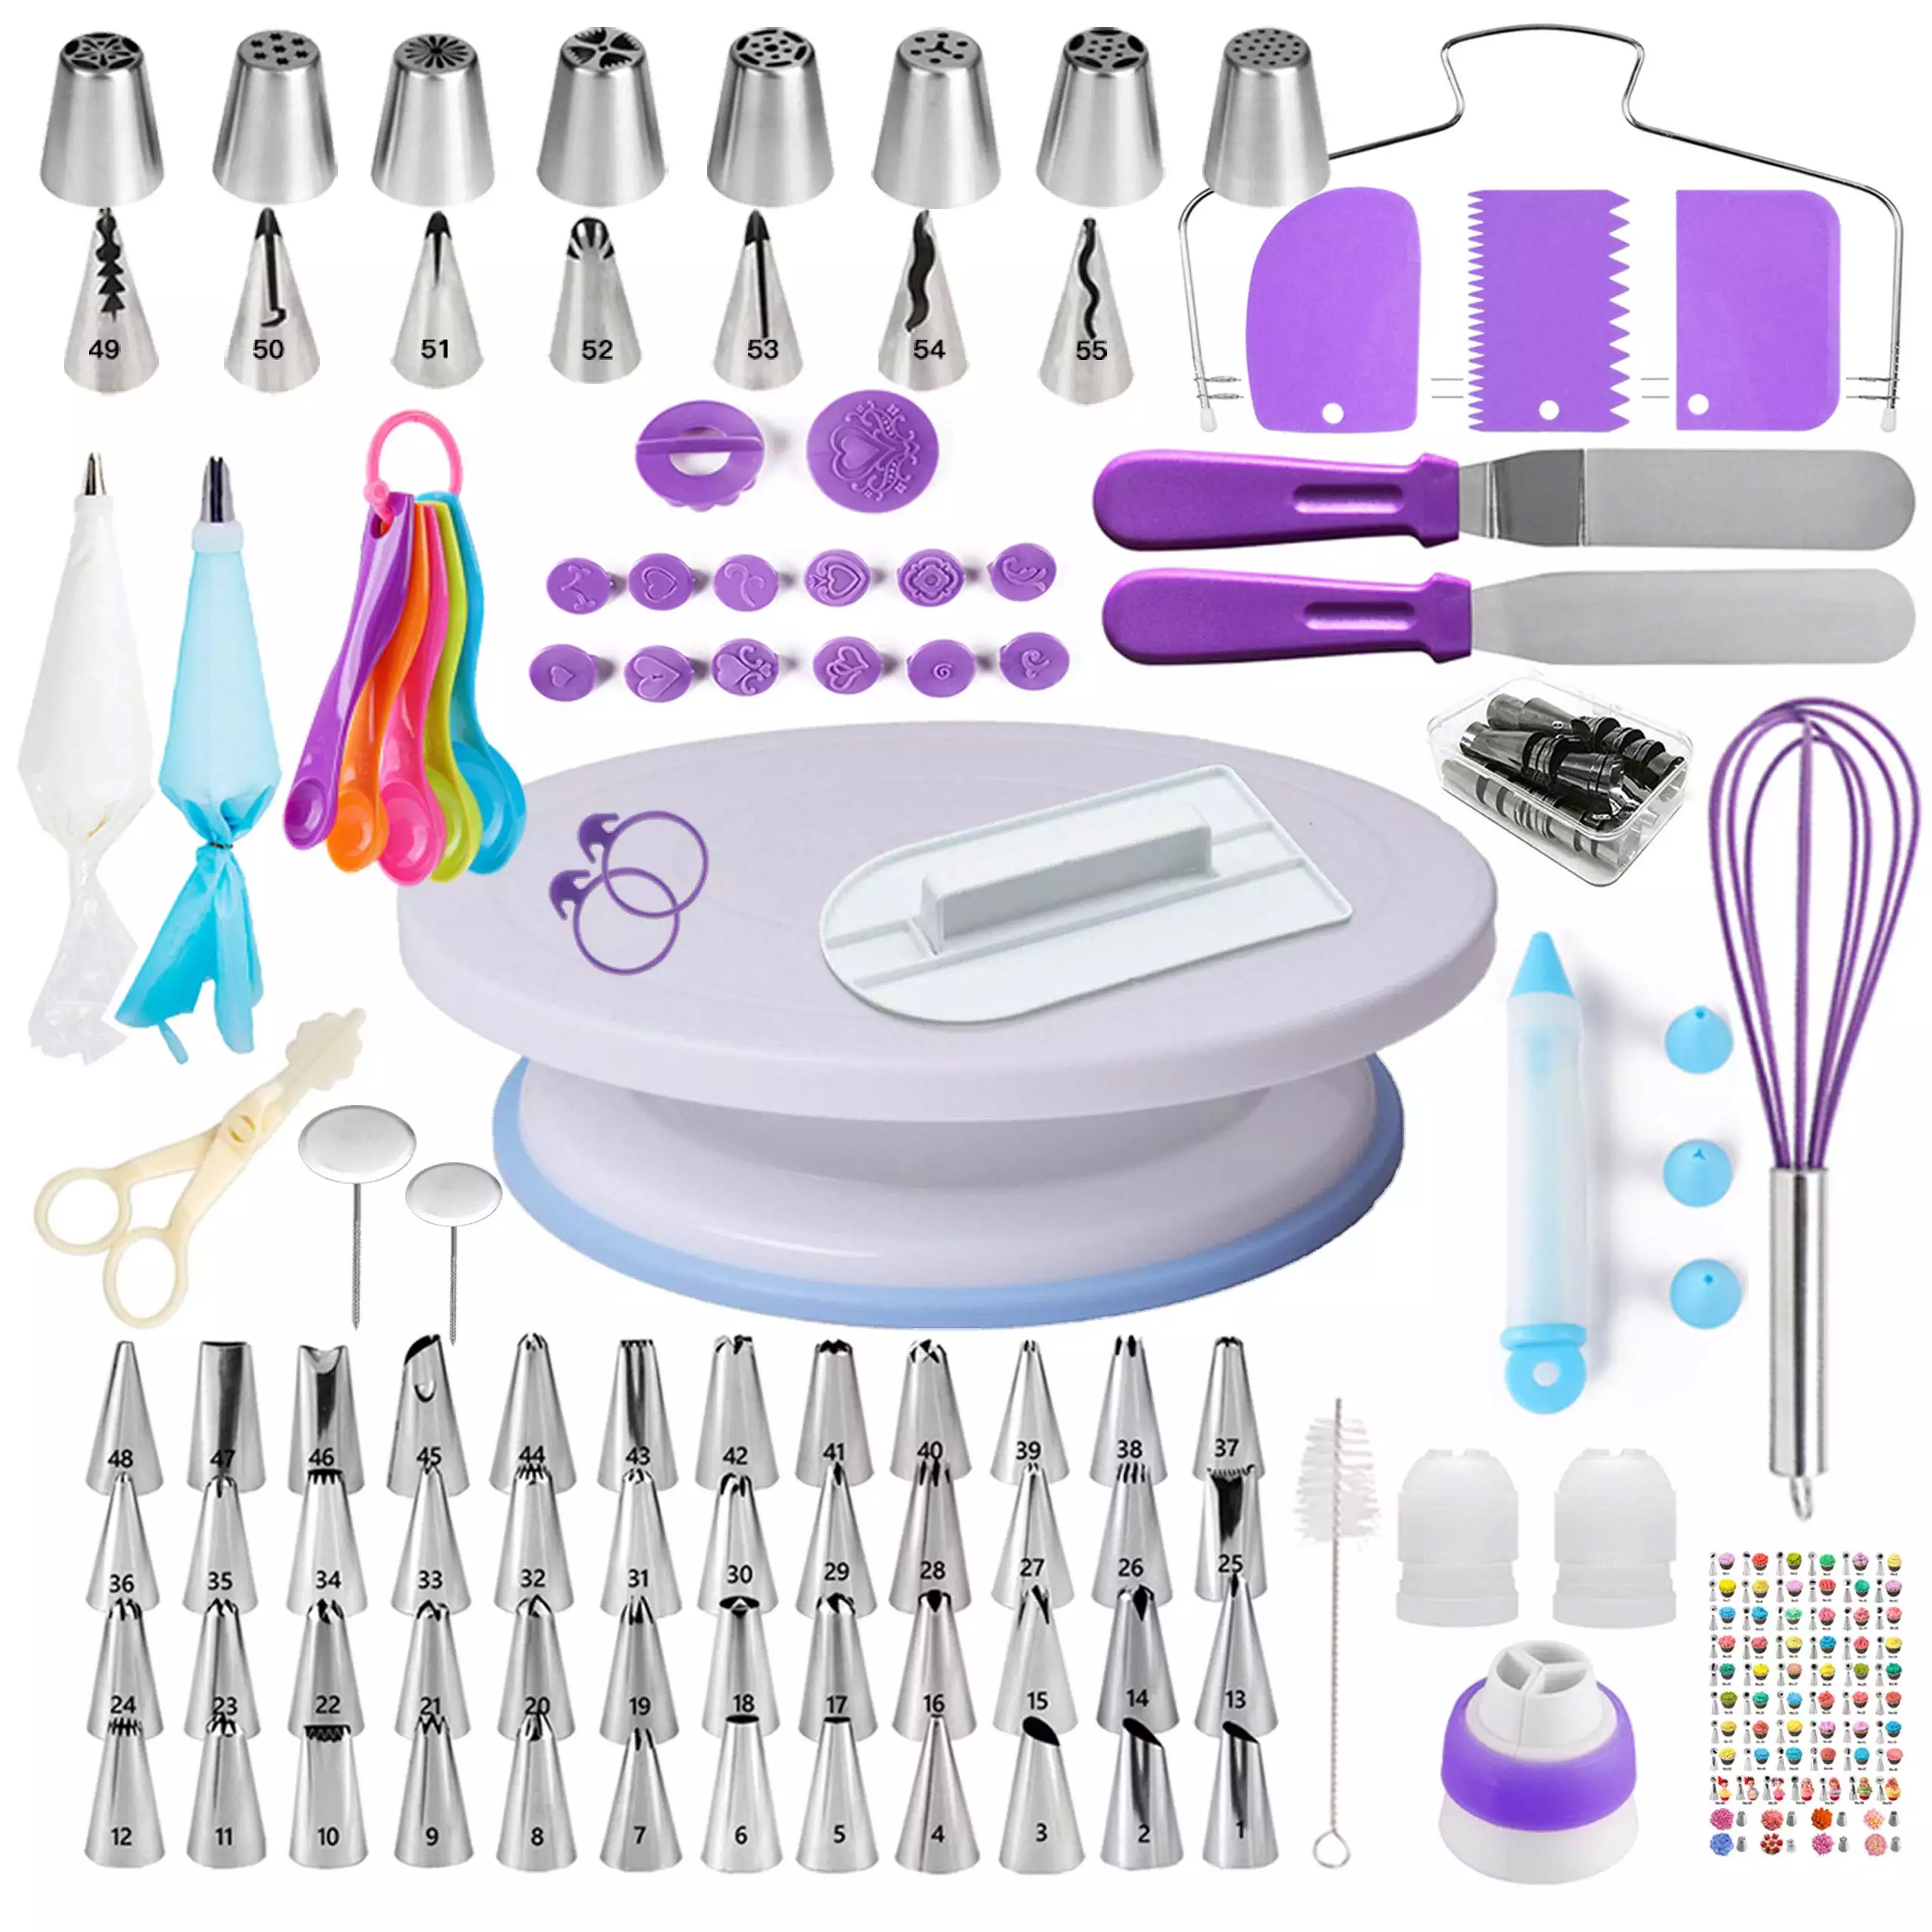 Amazon.com: Pepe Nero 136 Pcs Cake Decorating Kit Cake Baking and Decorating  Supplies Professional Cake Set Cake Starter Kit Cake Making Kit with  Decorating Pen, Muffin Cups, Spatulas, Turntable, Spoons and More :